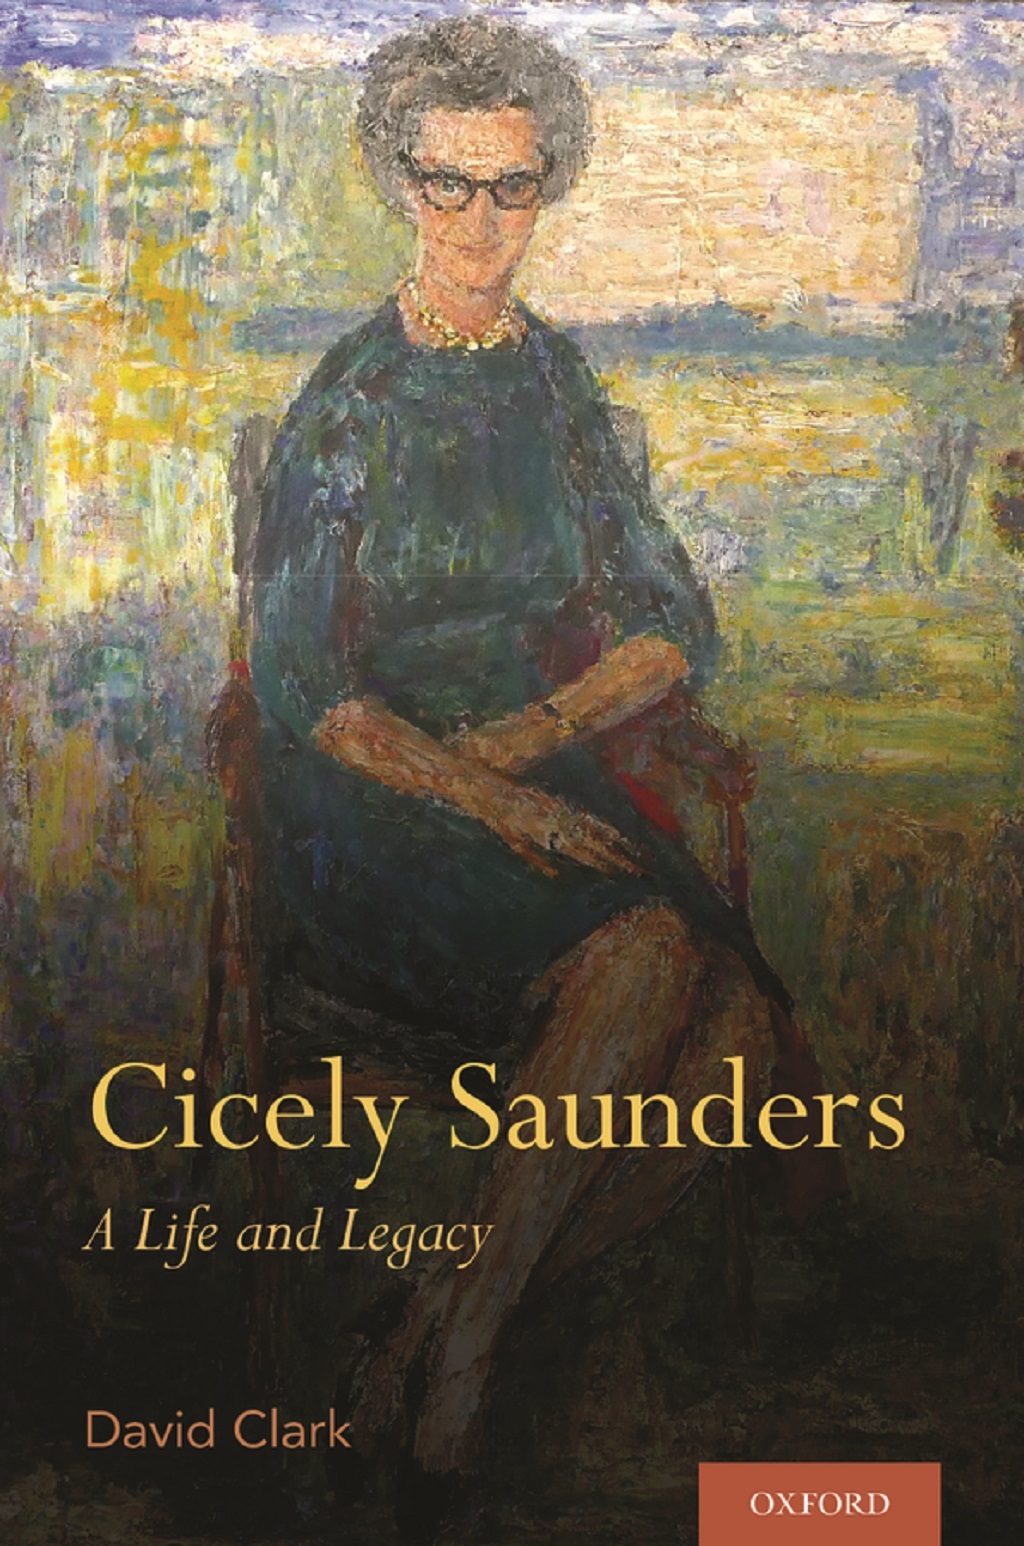 Cicely Saunders, by David Clark